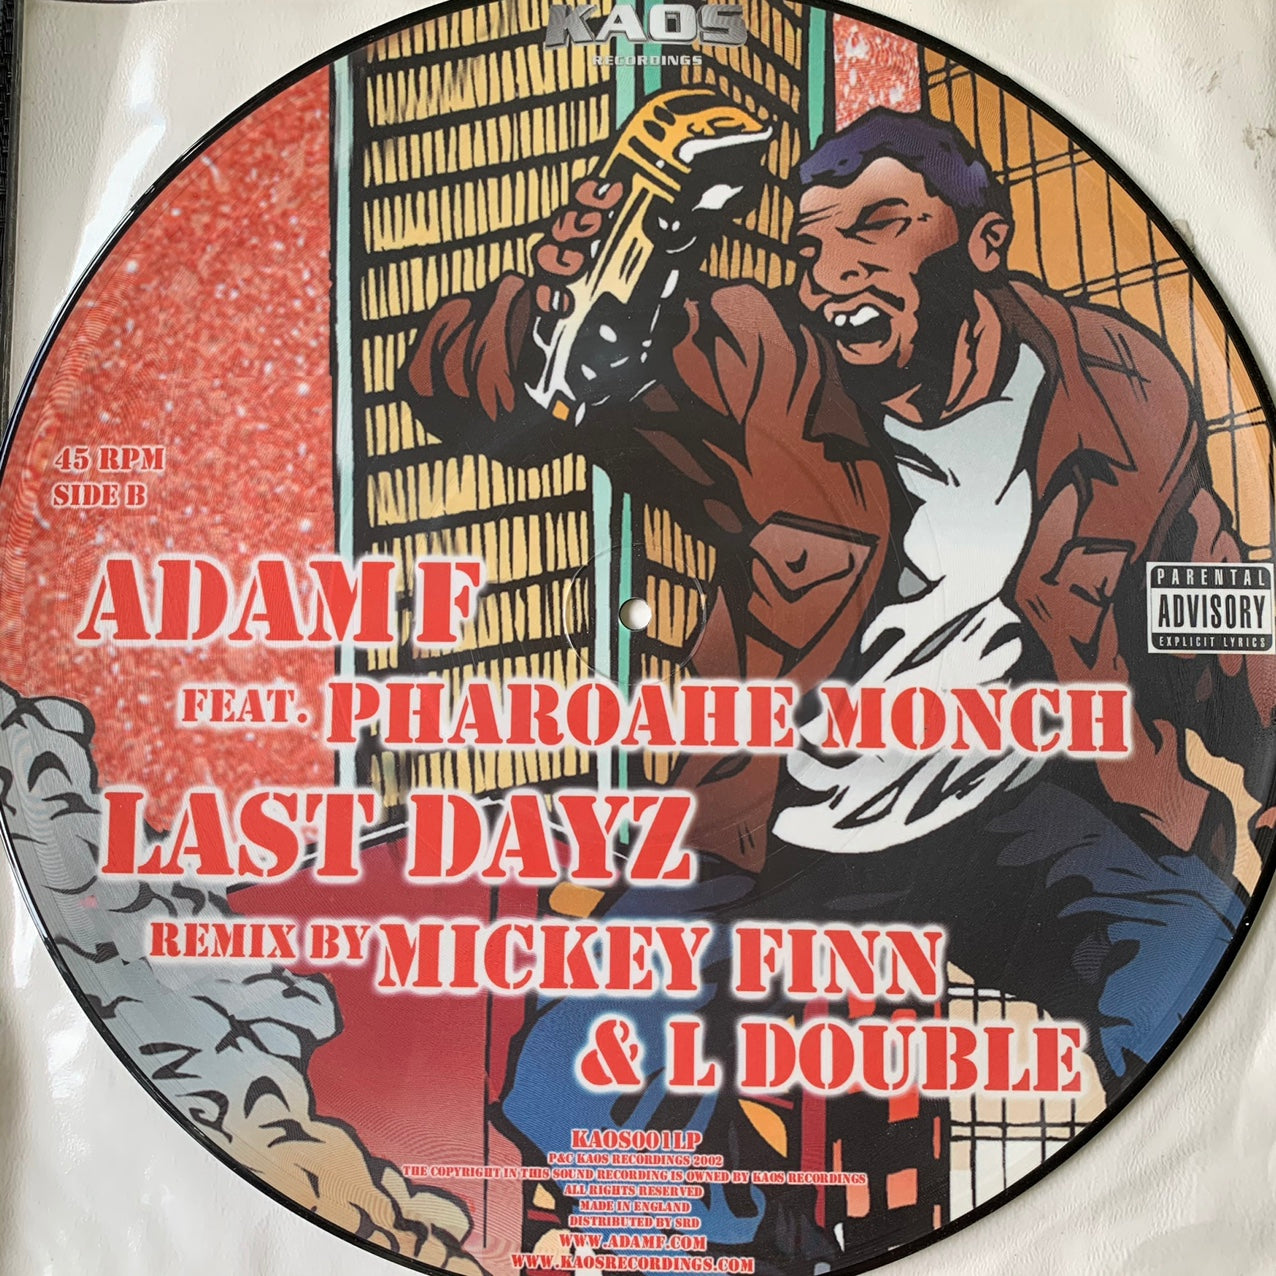 Adam F 2 x 12inch Limited Edition Picture Disc 4 Tracks Feat Capone n Noreaga, Pharoahe Monch, M.O.P. and Lil Mo